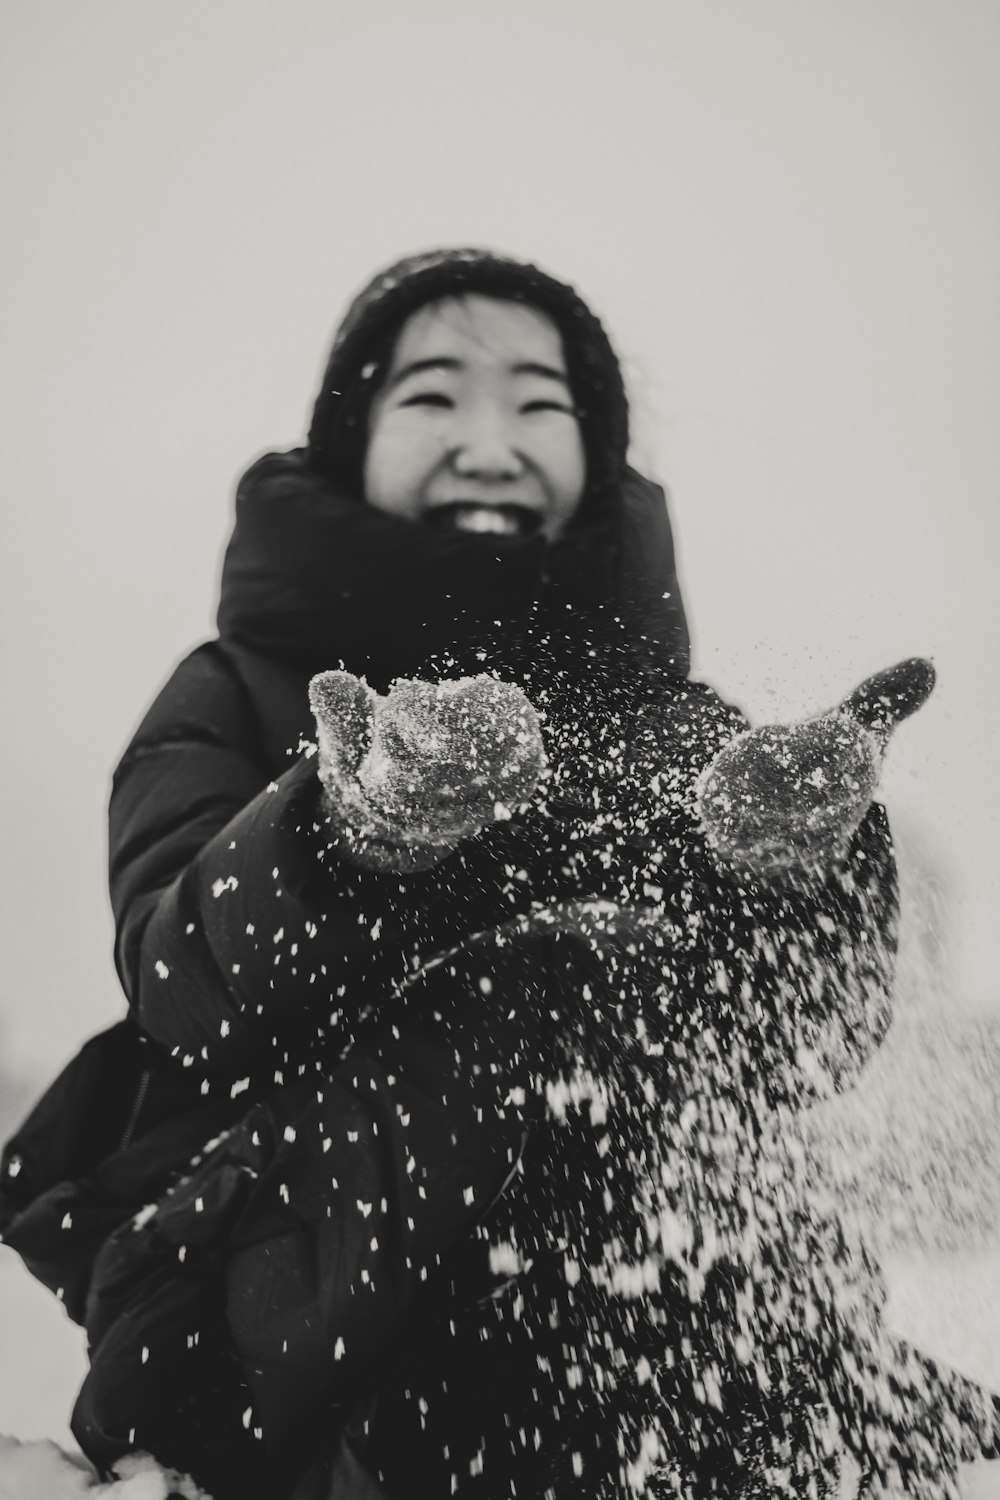 grayscale photography of woman playing with snow